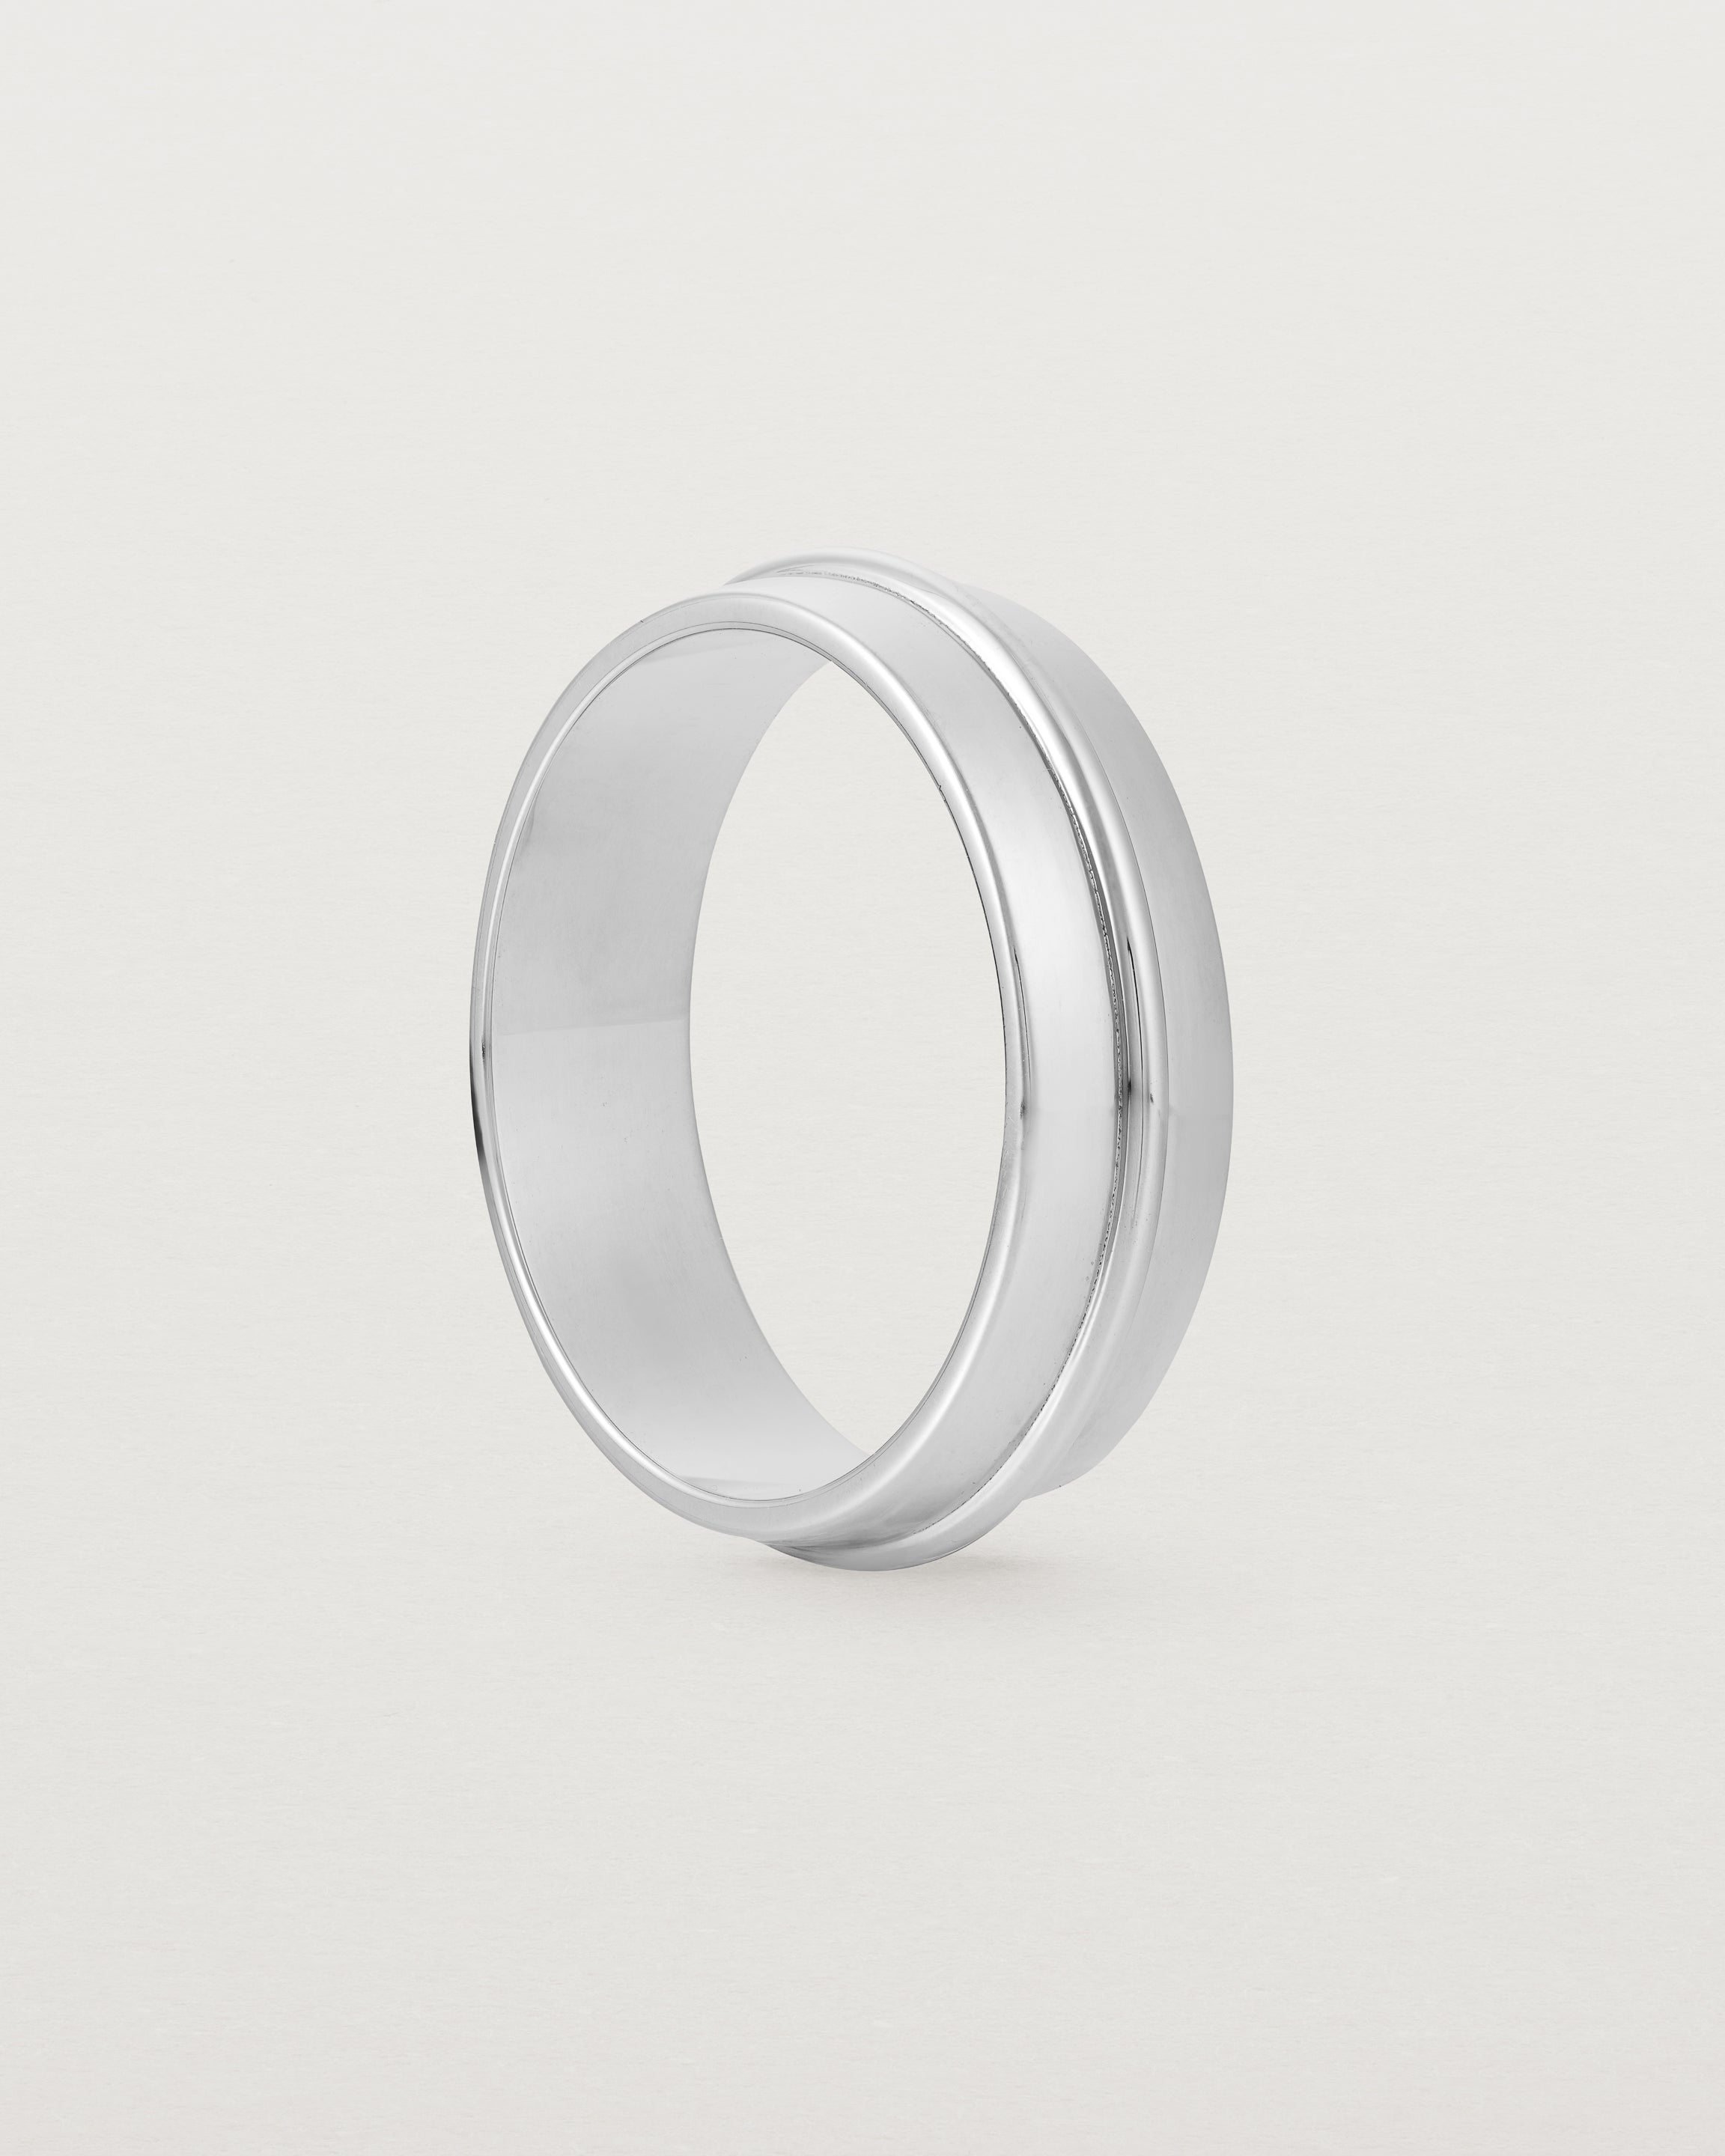 Angled view of the Seam Wedding Ring | 6mm | White Gold.